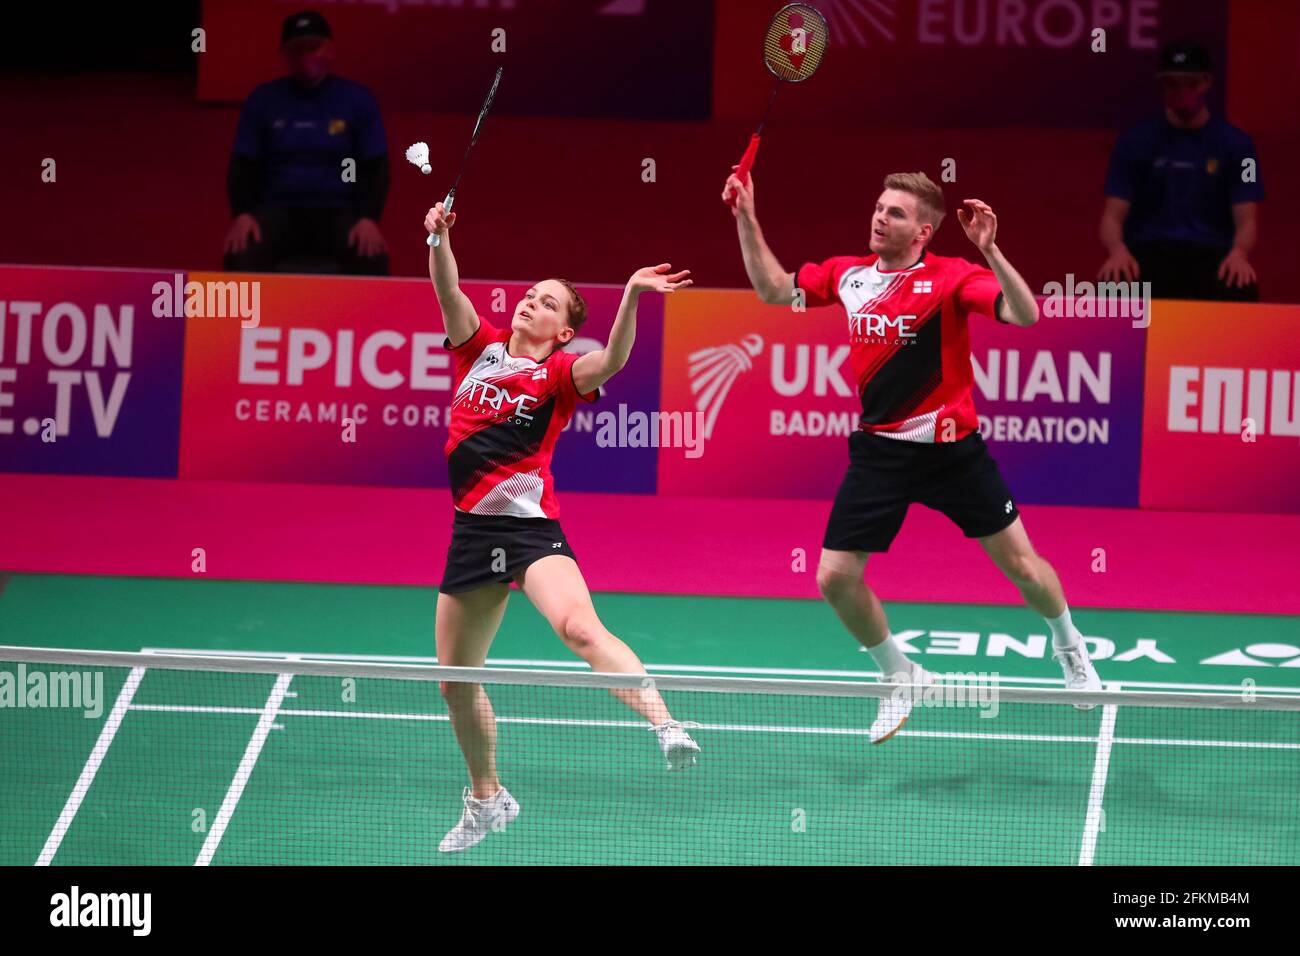 KYIV, UKRAINE - MAY 2: Marcus Ellis of England and Lauren Smith of England compete in their Mixed Doubles Final match against Rodion Alimov of Russia Stock Photo